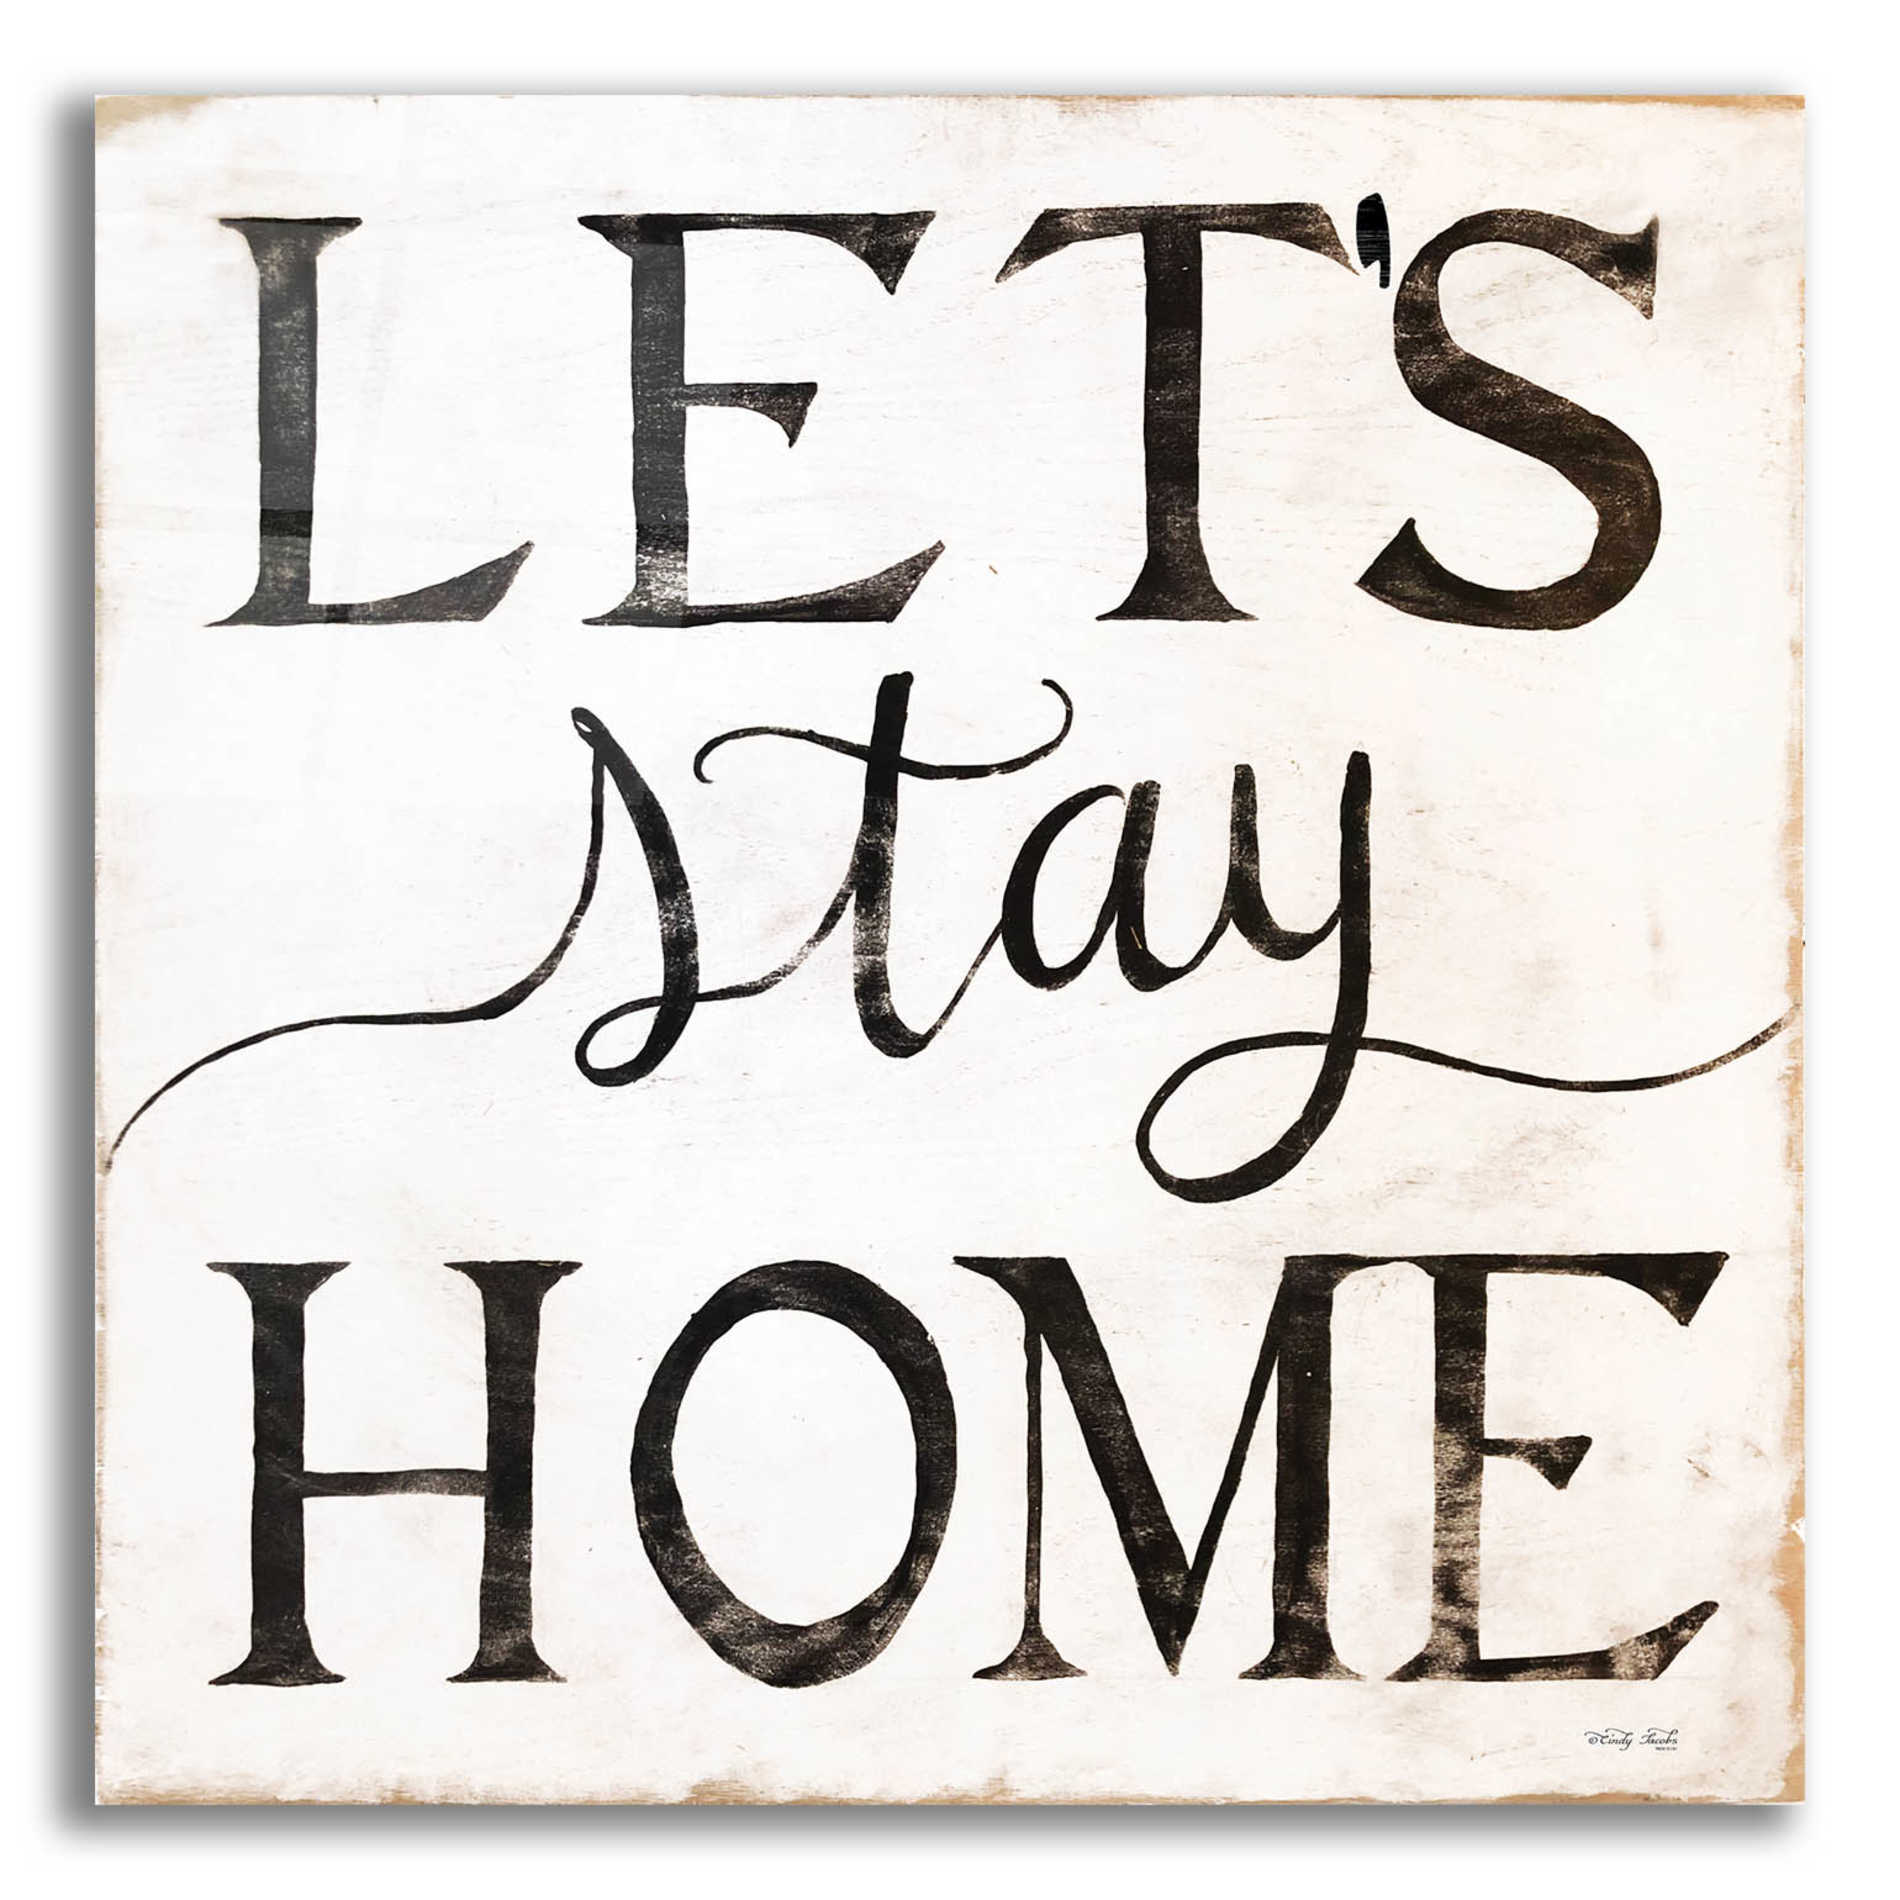 Epic Art 'Let's Stay Home I' by Cindy Jacobs, Acrylic Glass Wall Art,12x12